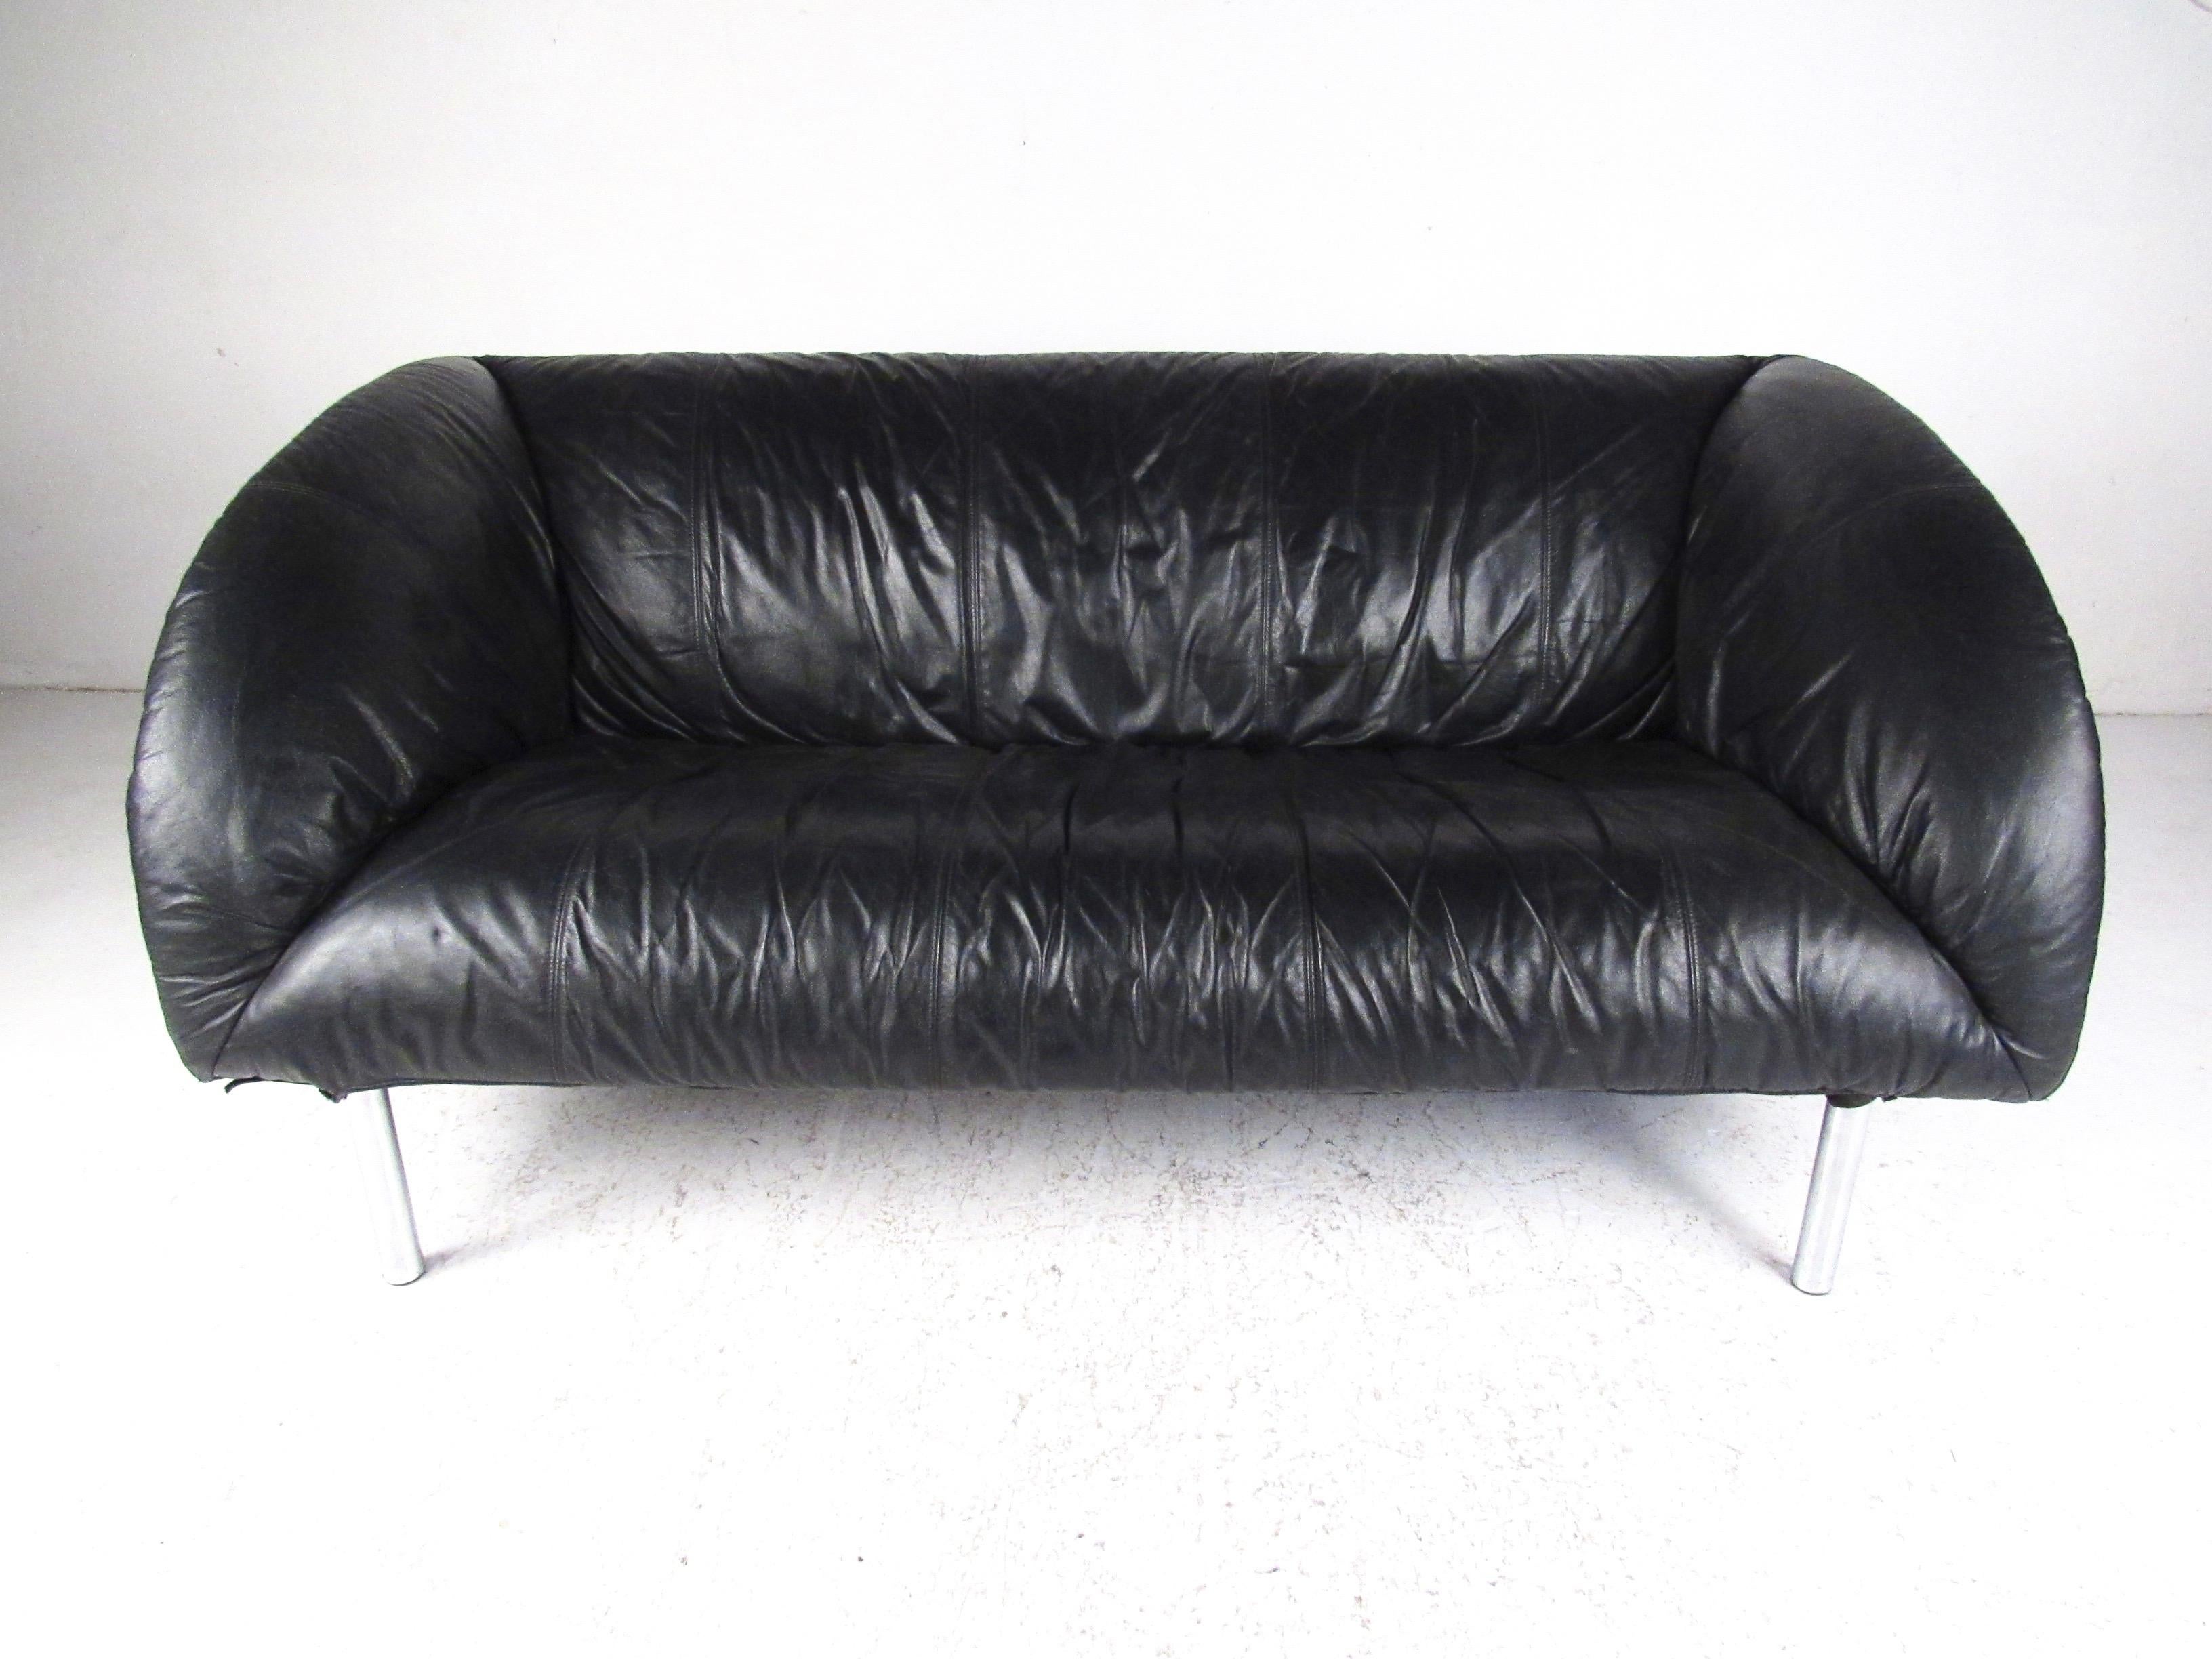 This comfortable modern sofa features shapely two seat design with black leather upholstery. Chrome legs add to the modern appeal and mid-century style of this sofa, perfect seating for home, office, or business arrangement. Please confirm item